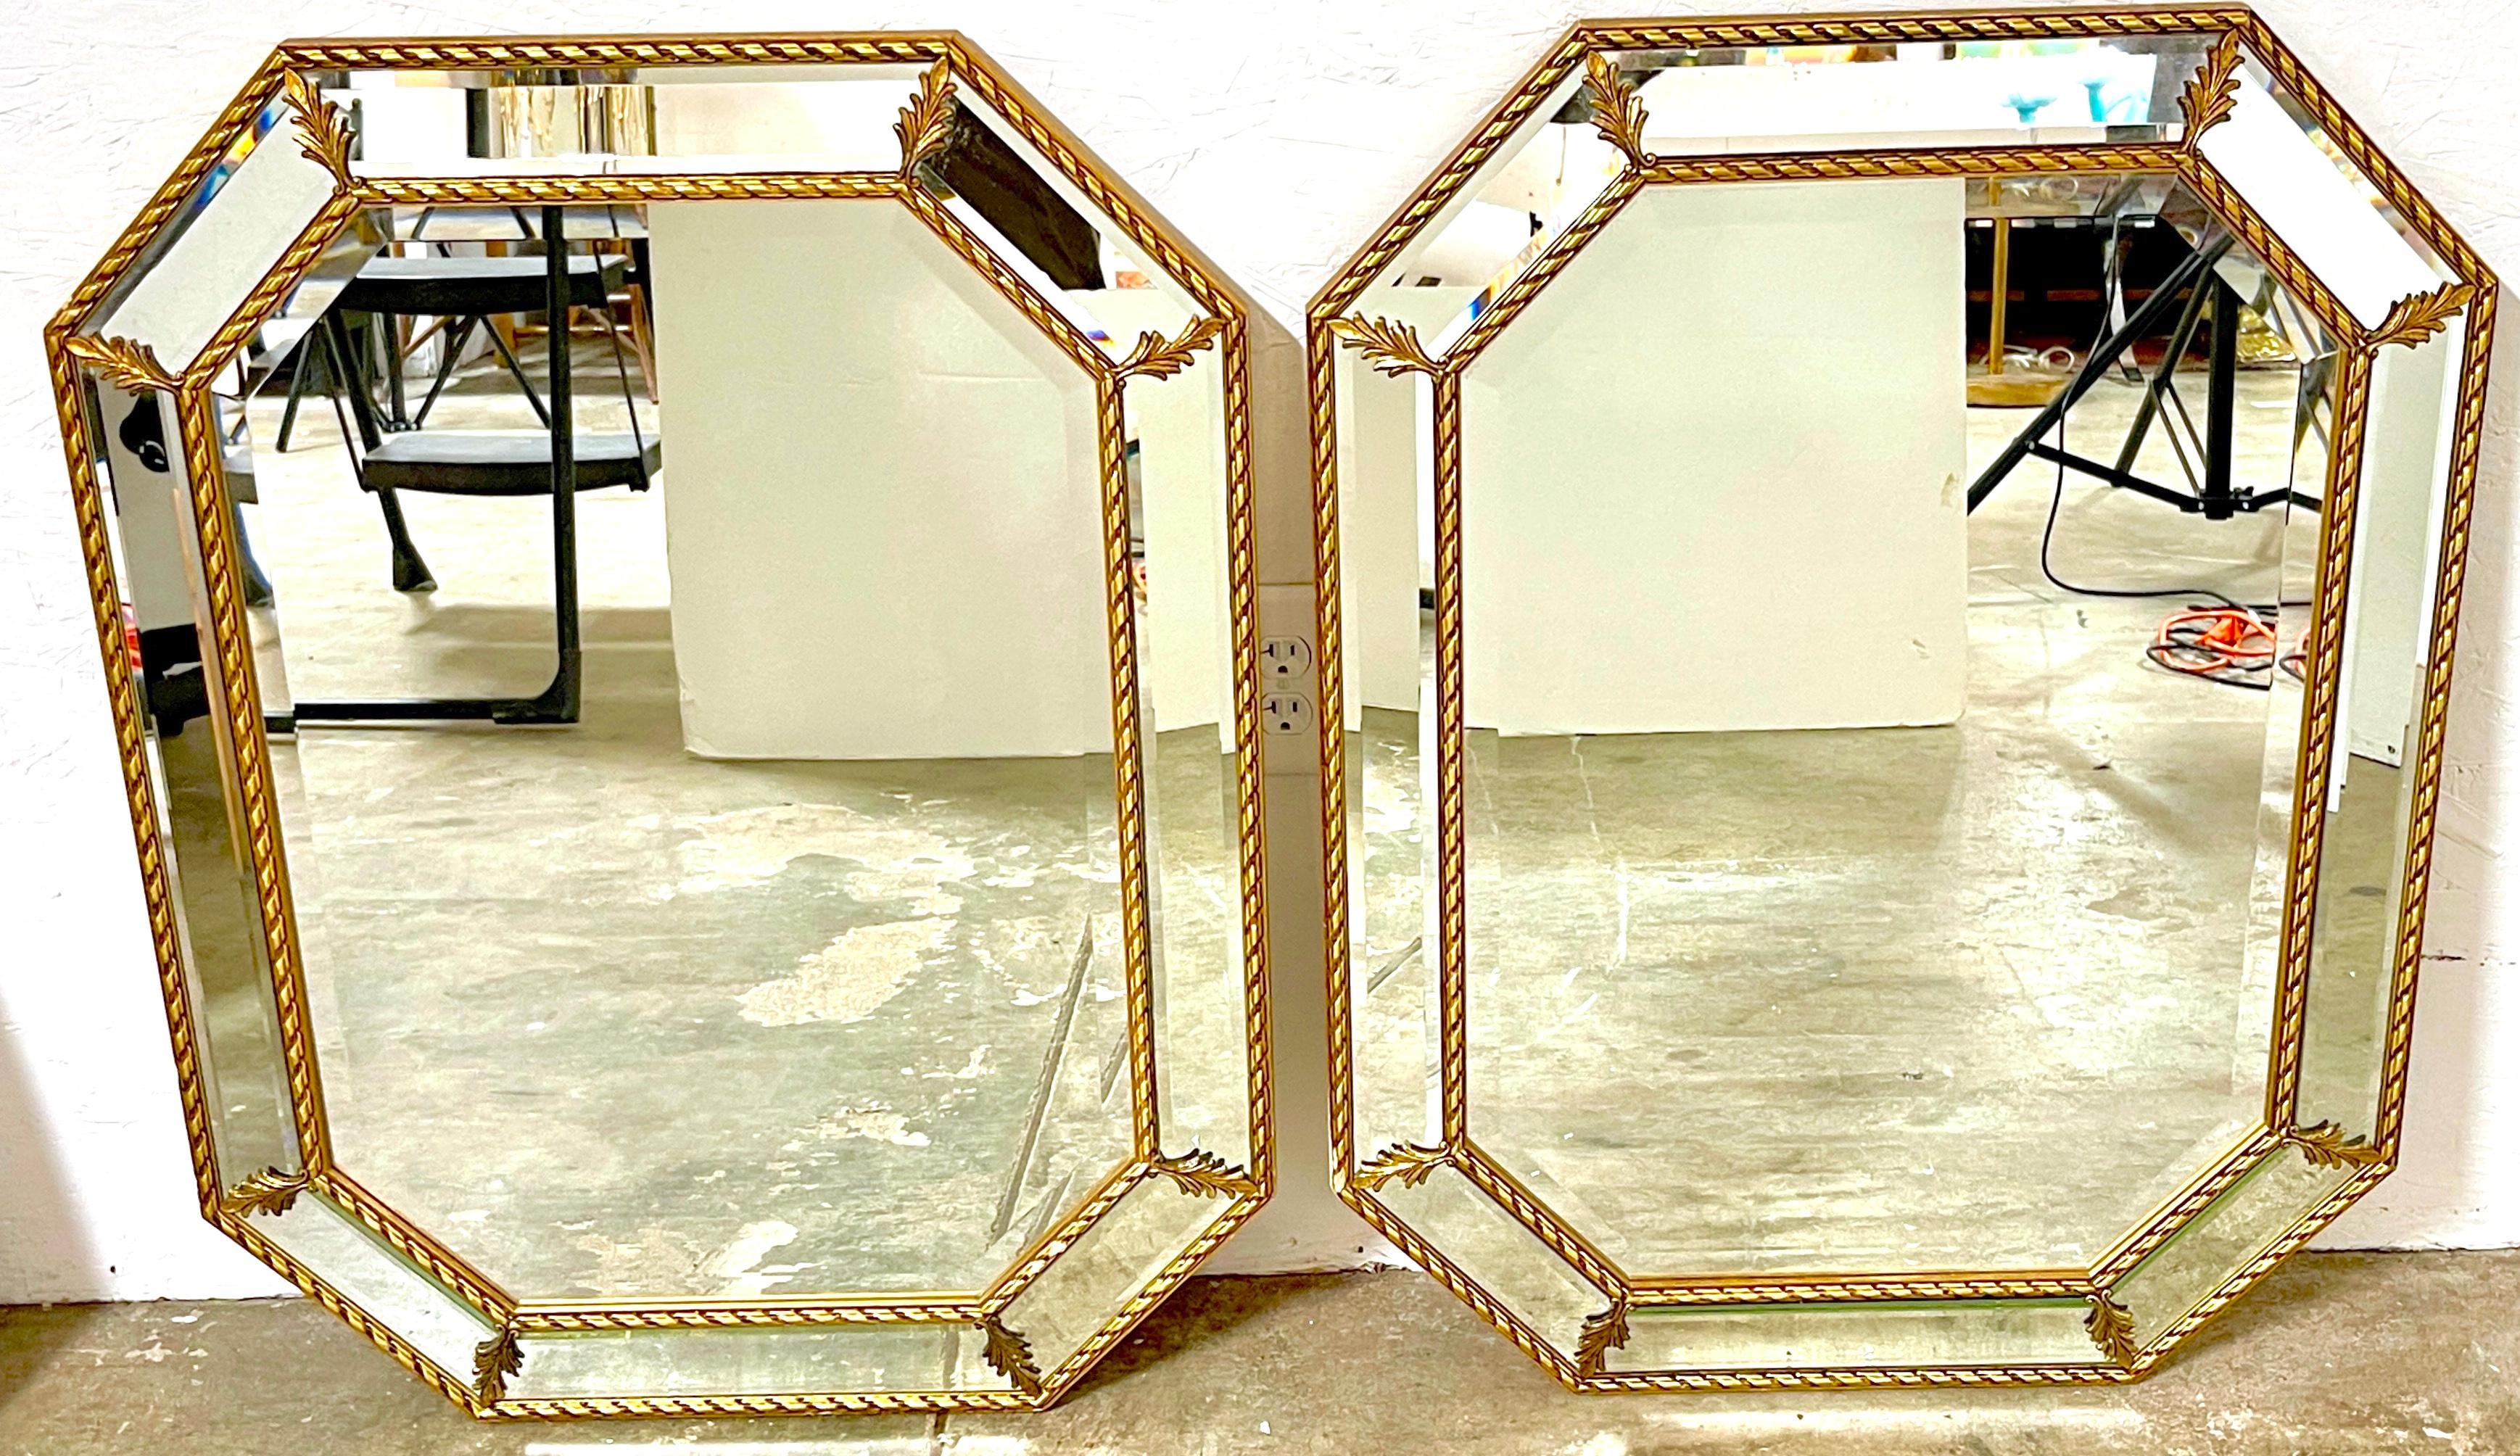 Pair of Italian Giltwood Neoclassical Beveled Mirrors 
Italy, circa 1960s

A hard to find Pair of vintage Italian Giltwood Neoclassical Beveled Mirrors originating from Italy in the 1960s. Each mirror, measuring 33 inches in height by 26 inches in